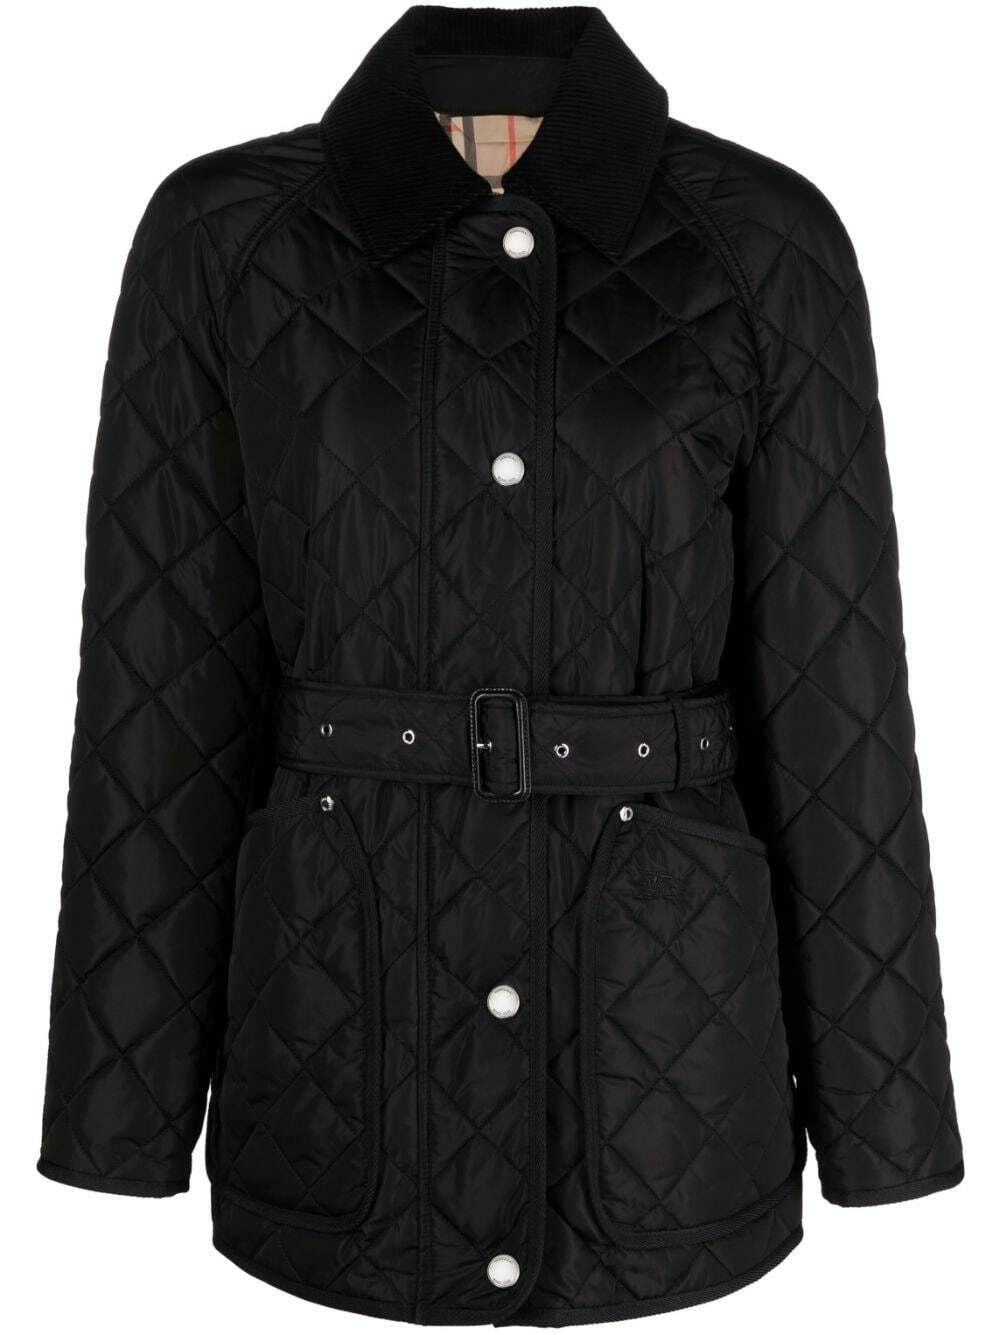 BURBERRY - Nylon Quilted Jacket Burberry